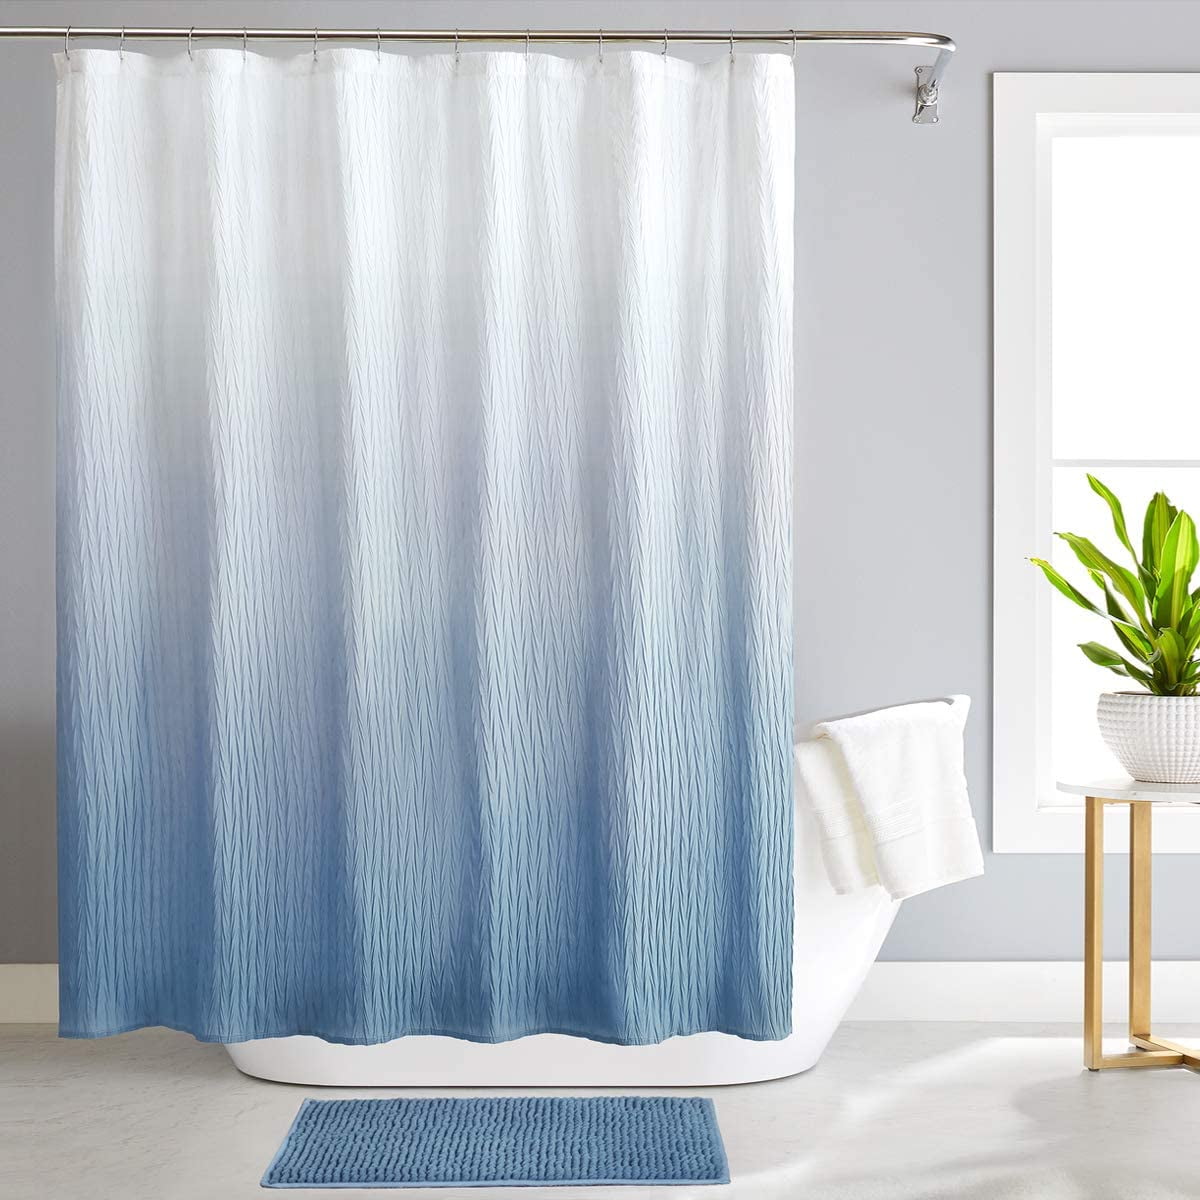 12 Hooks New Waterproof Polyester Shower Curtain 72" x 72" 